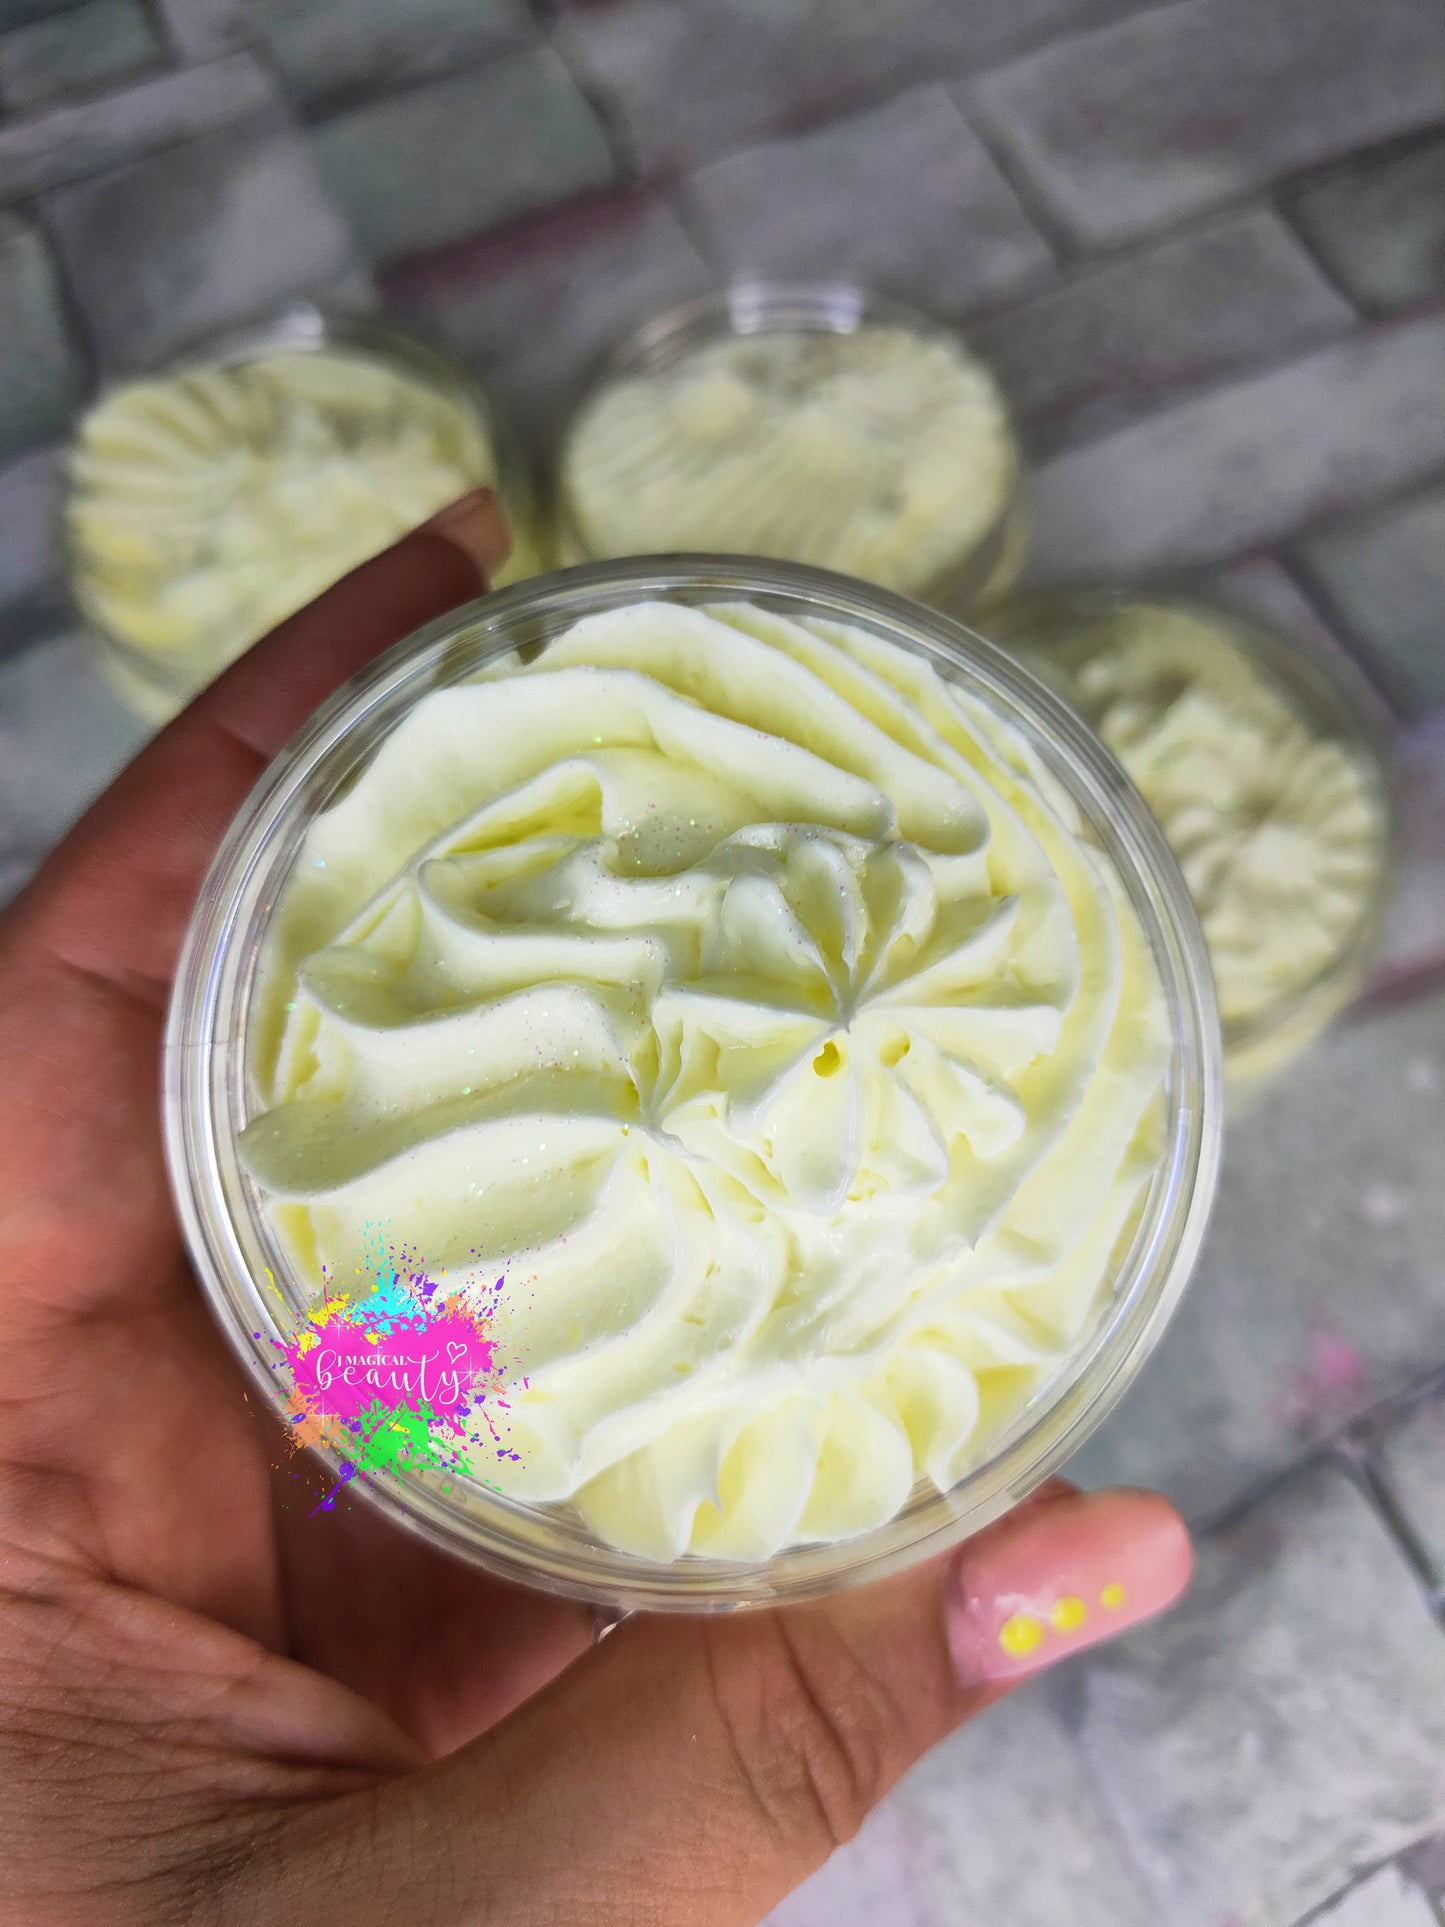 Whipped Soap Argan scent